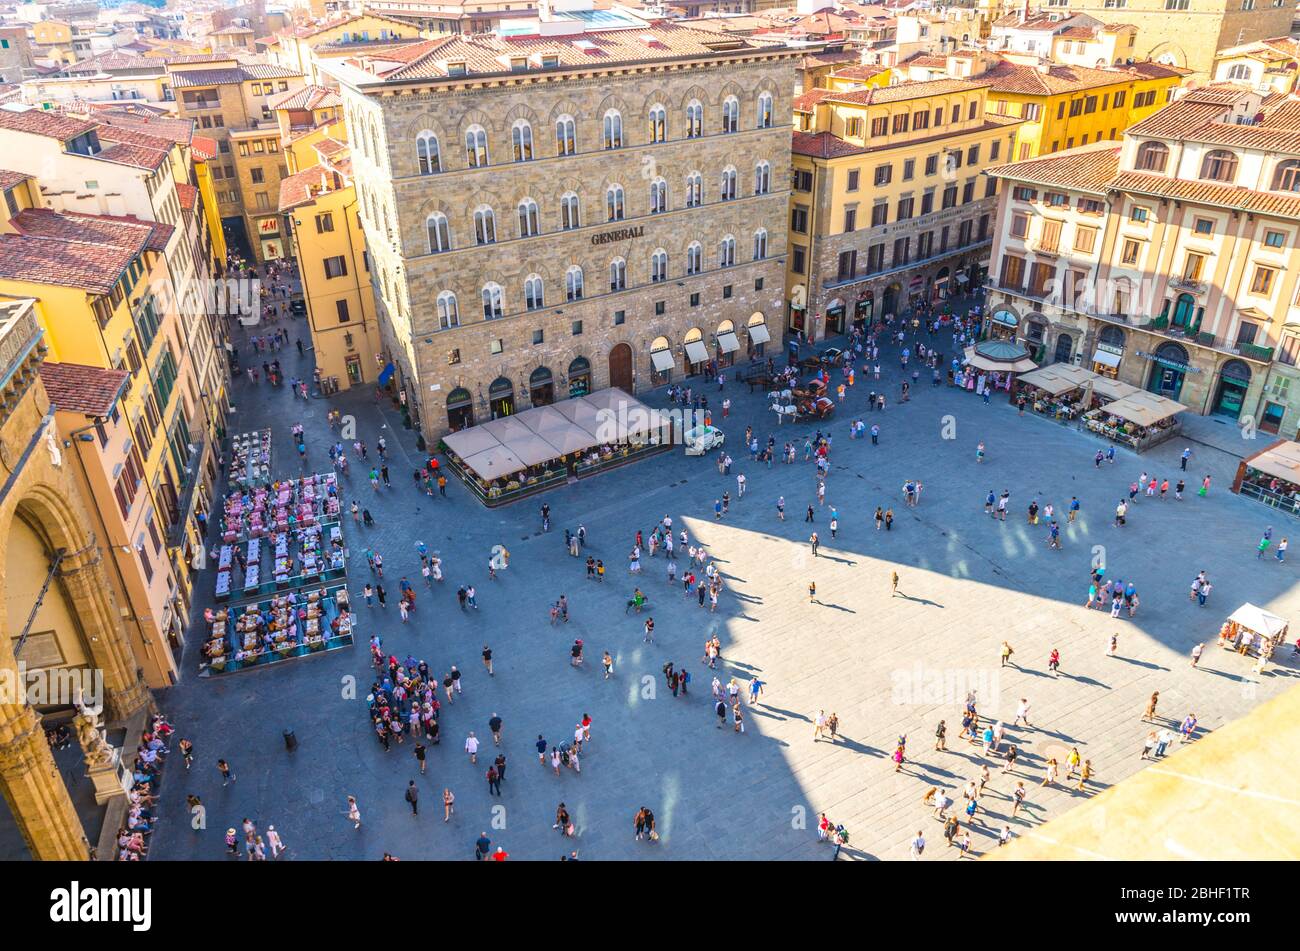 Florence, Italy, September 15, 2018: Crowd of small figures of people are walking on Piazza della Signoria square in historical centre, top view from Palazzo Vecchio palace Stock Photo